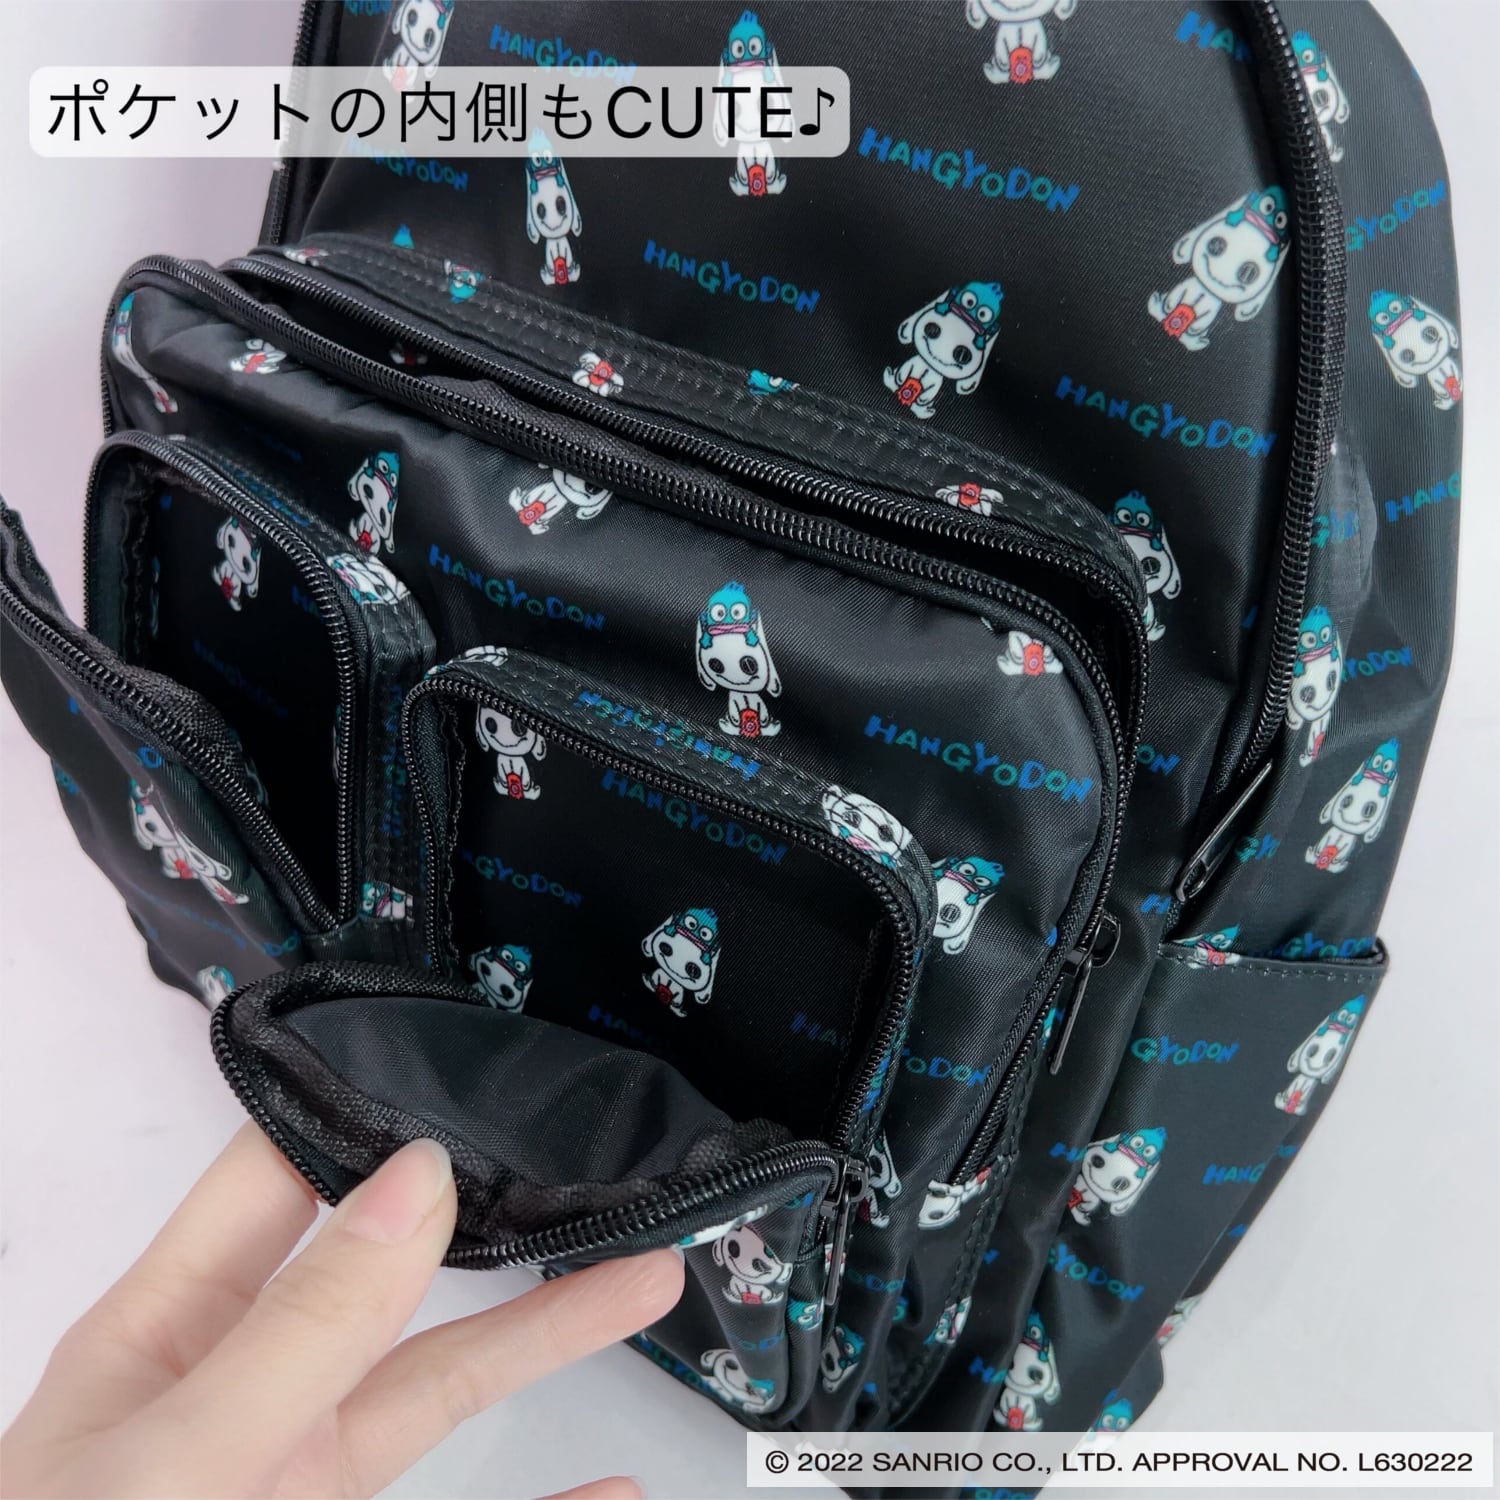 BACKPACK 【ハンギョドン×NieRちゃん】 | NIER CLOTHING powered by BASE